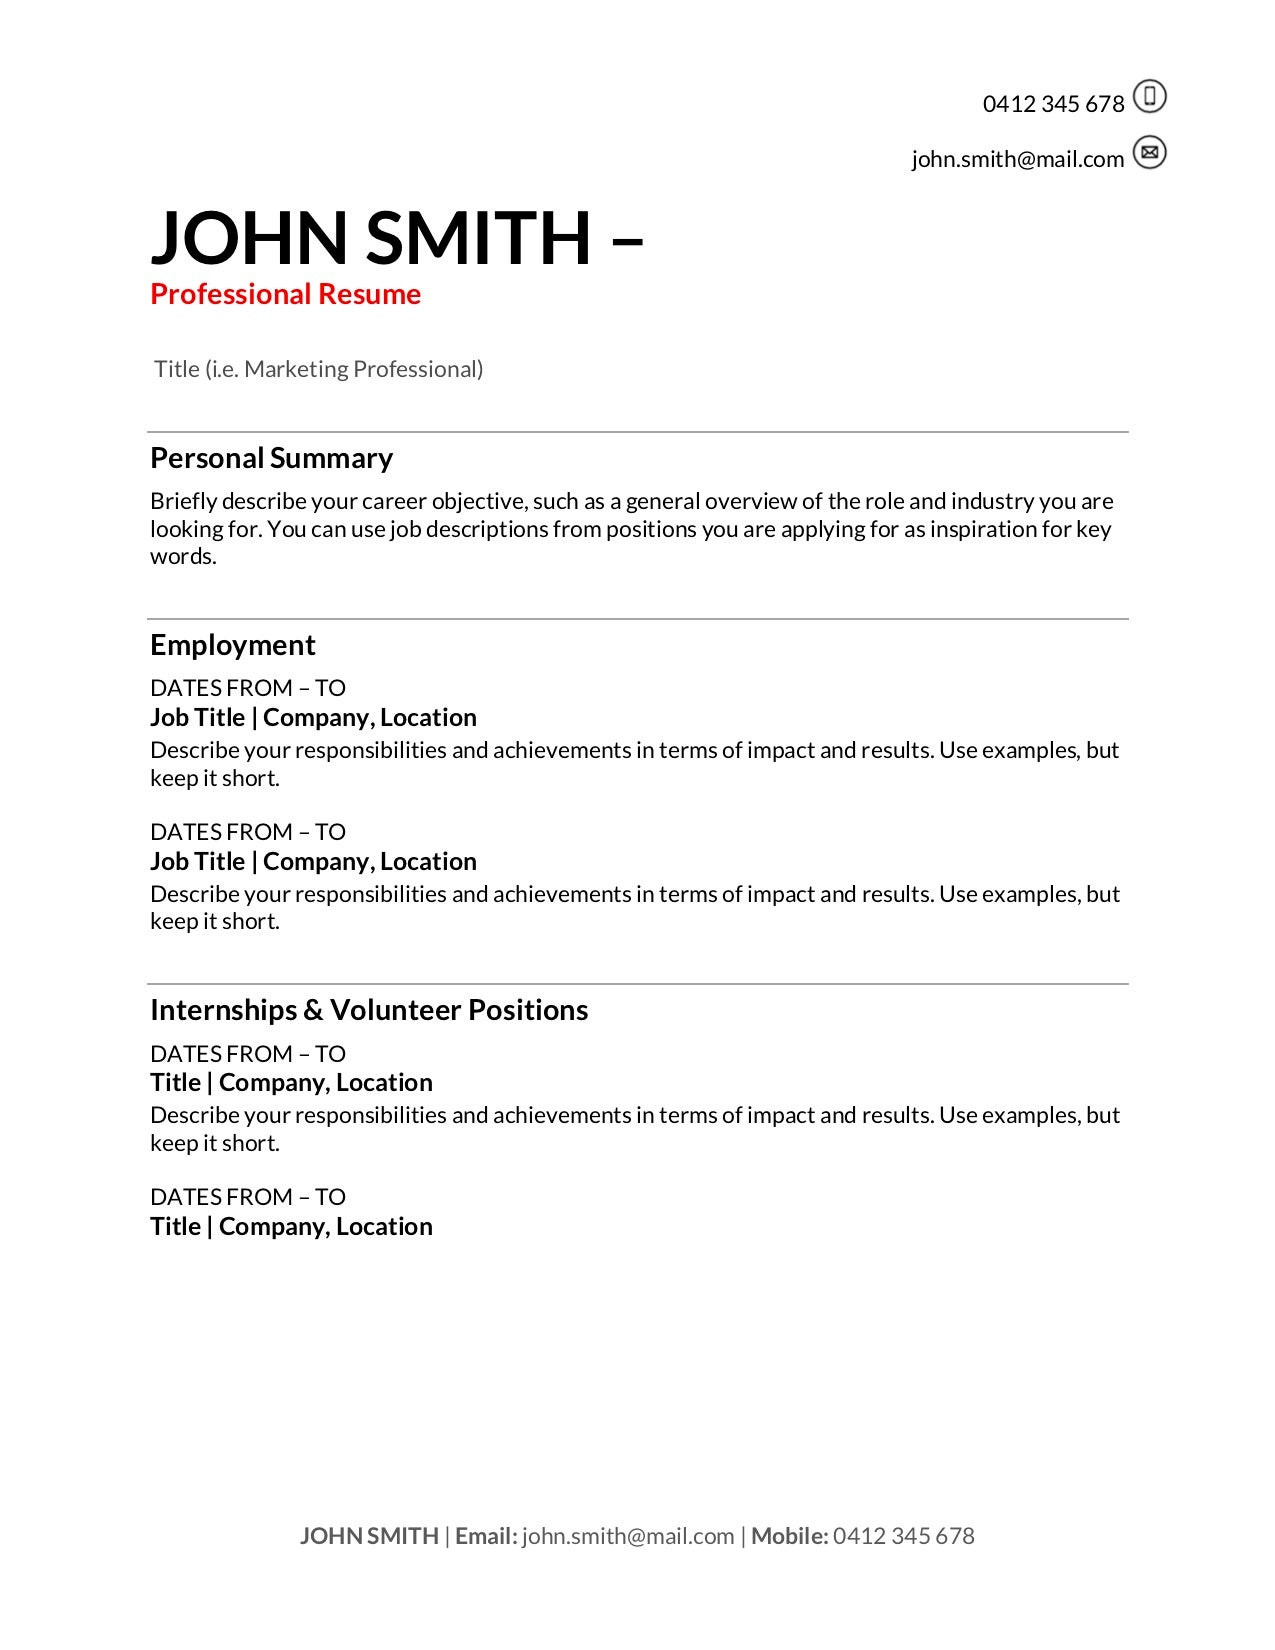 Sample Of Golf Outside Services Resume for Job Application Free Resume Templates [download]: How to Write A Resume In 2022 …